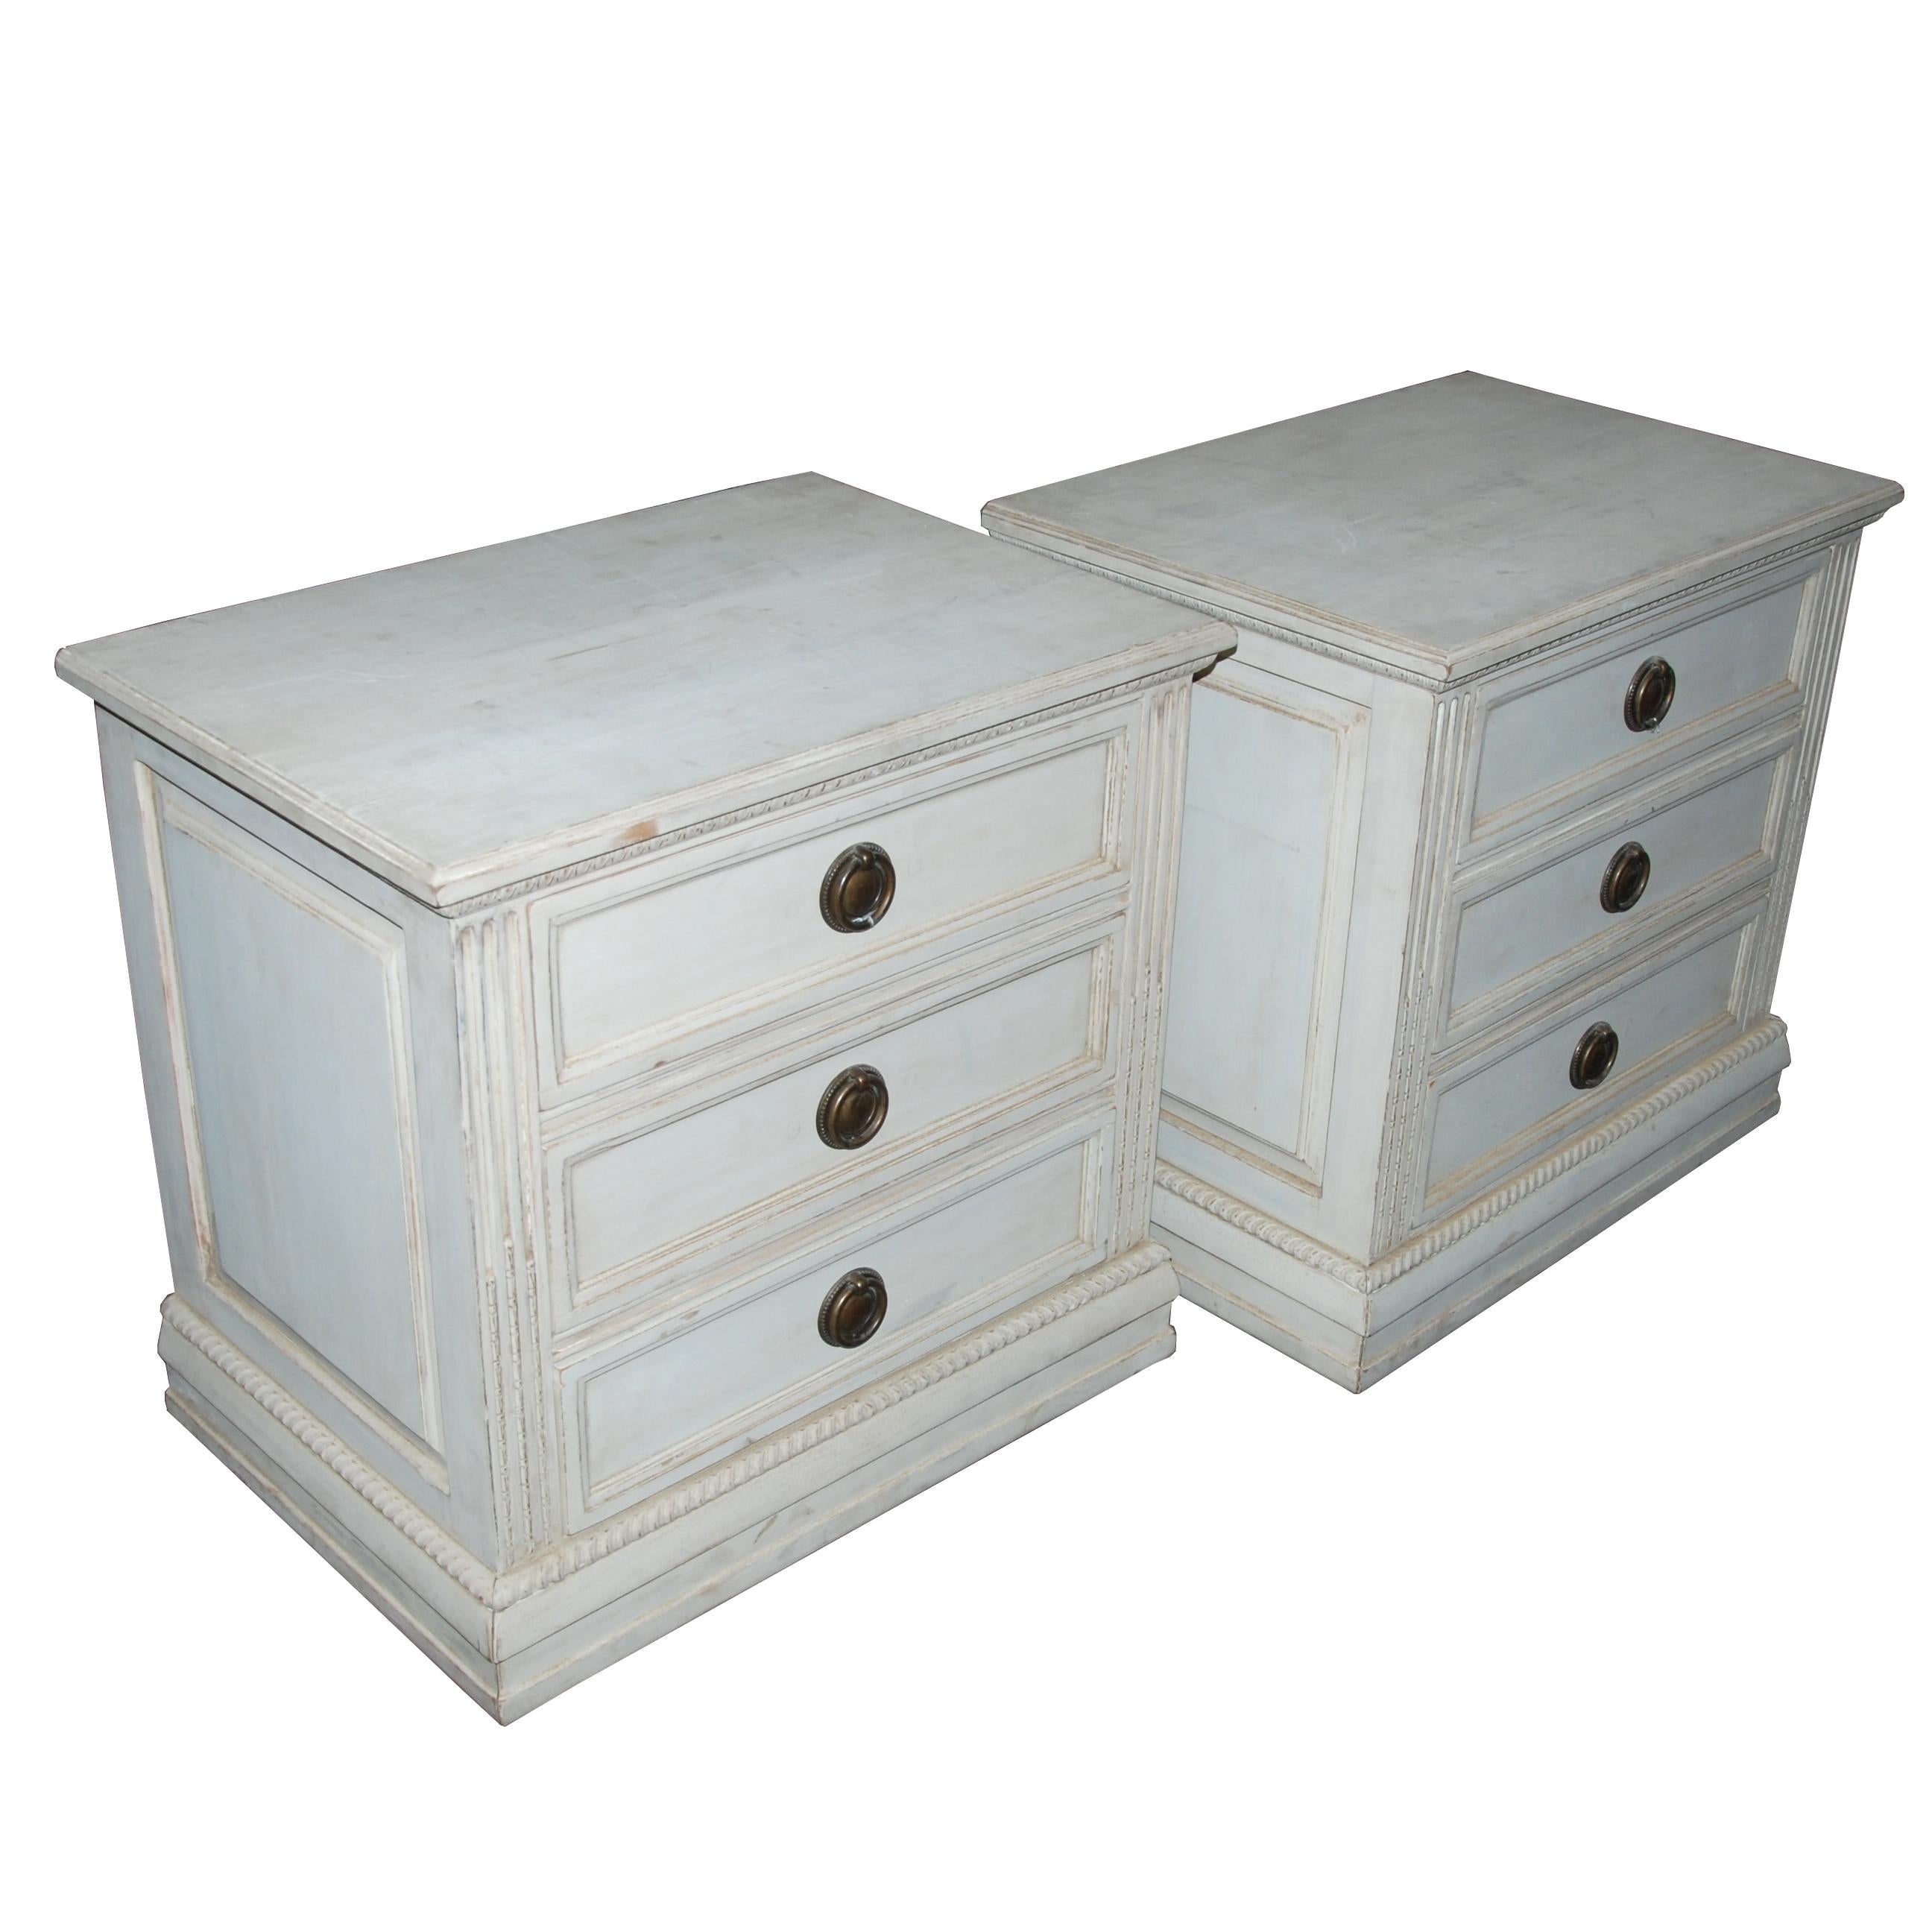 Pair of Swedish Gustavian period nightstands

Pair of antique Swedish bedside chests painted in
milk paint

Three drawers with medallion pulls
 
Early 20th century, circa 1900-1920.
  